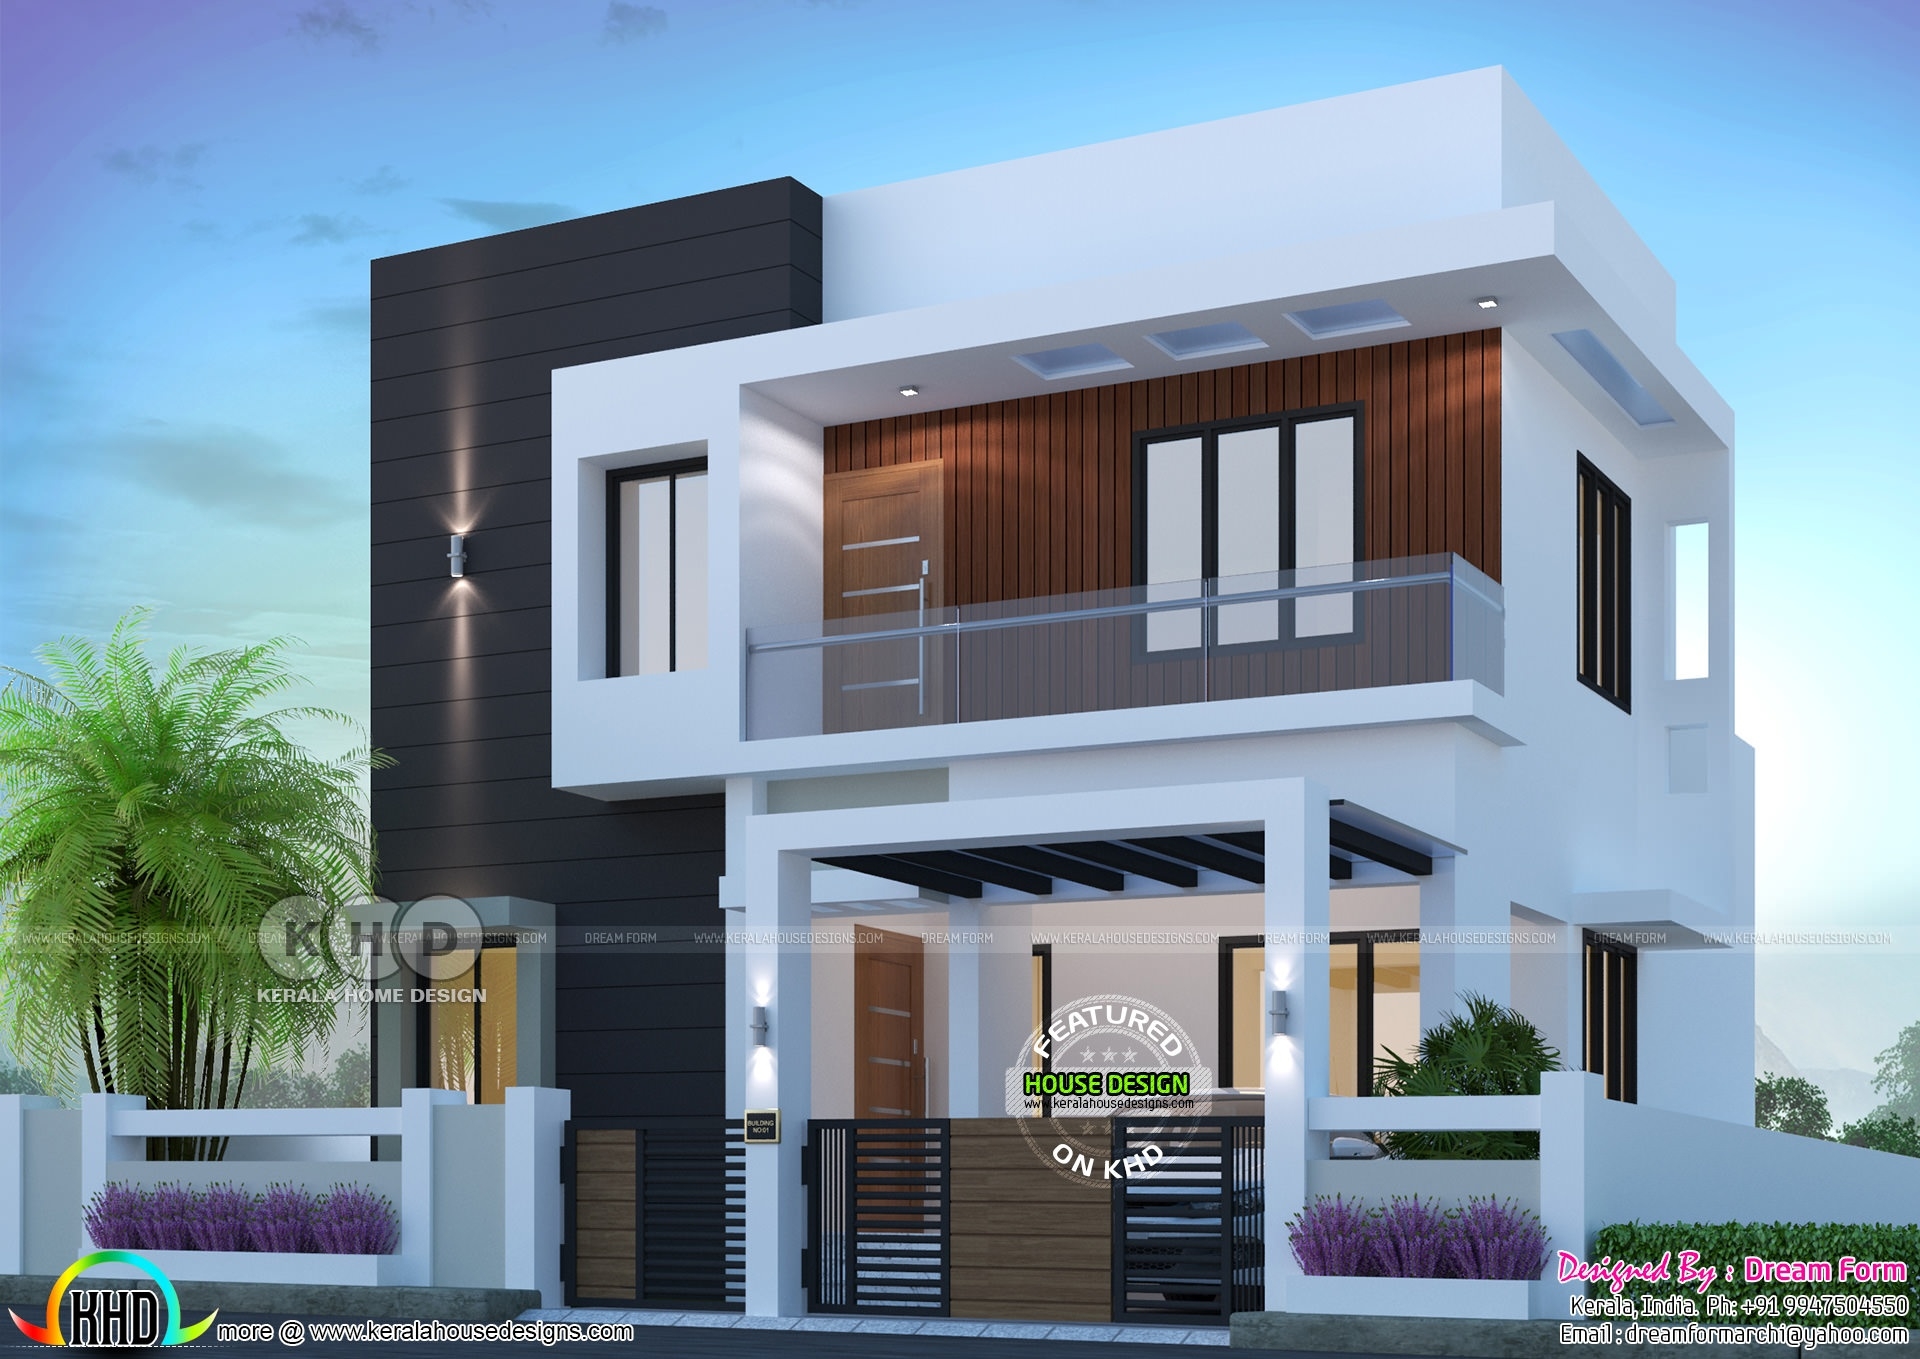 Most inspiring 1500 sq ft 3 bedroom modern home plan kerala home design and floor with three bedroom modern house